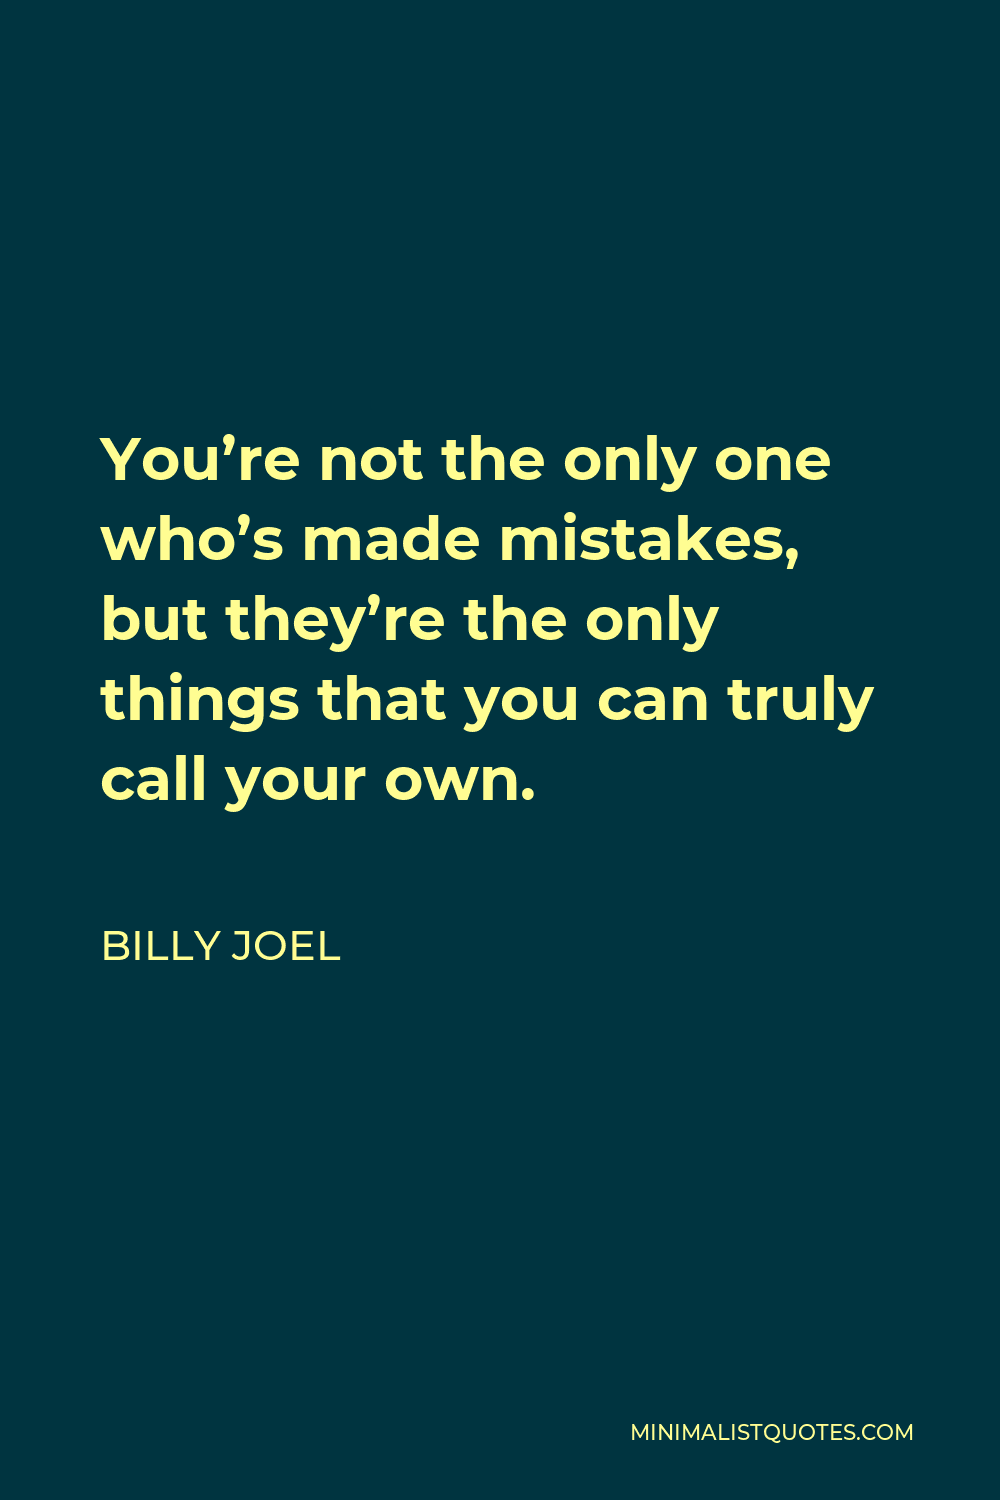 Billy Joel Quote - You’re not the only one who’s made mistakes, but they’re the only things that you can truly call your own.